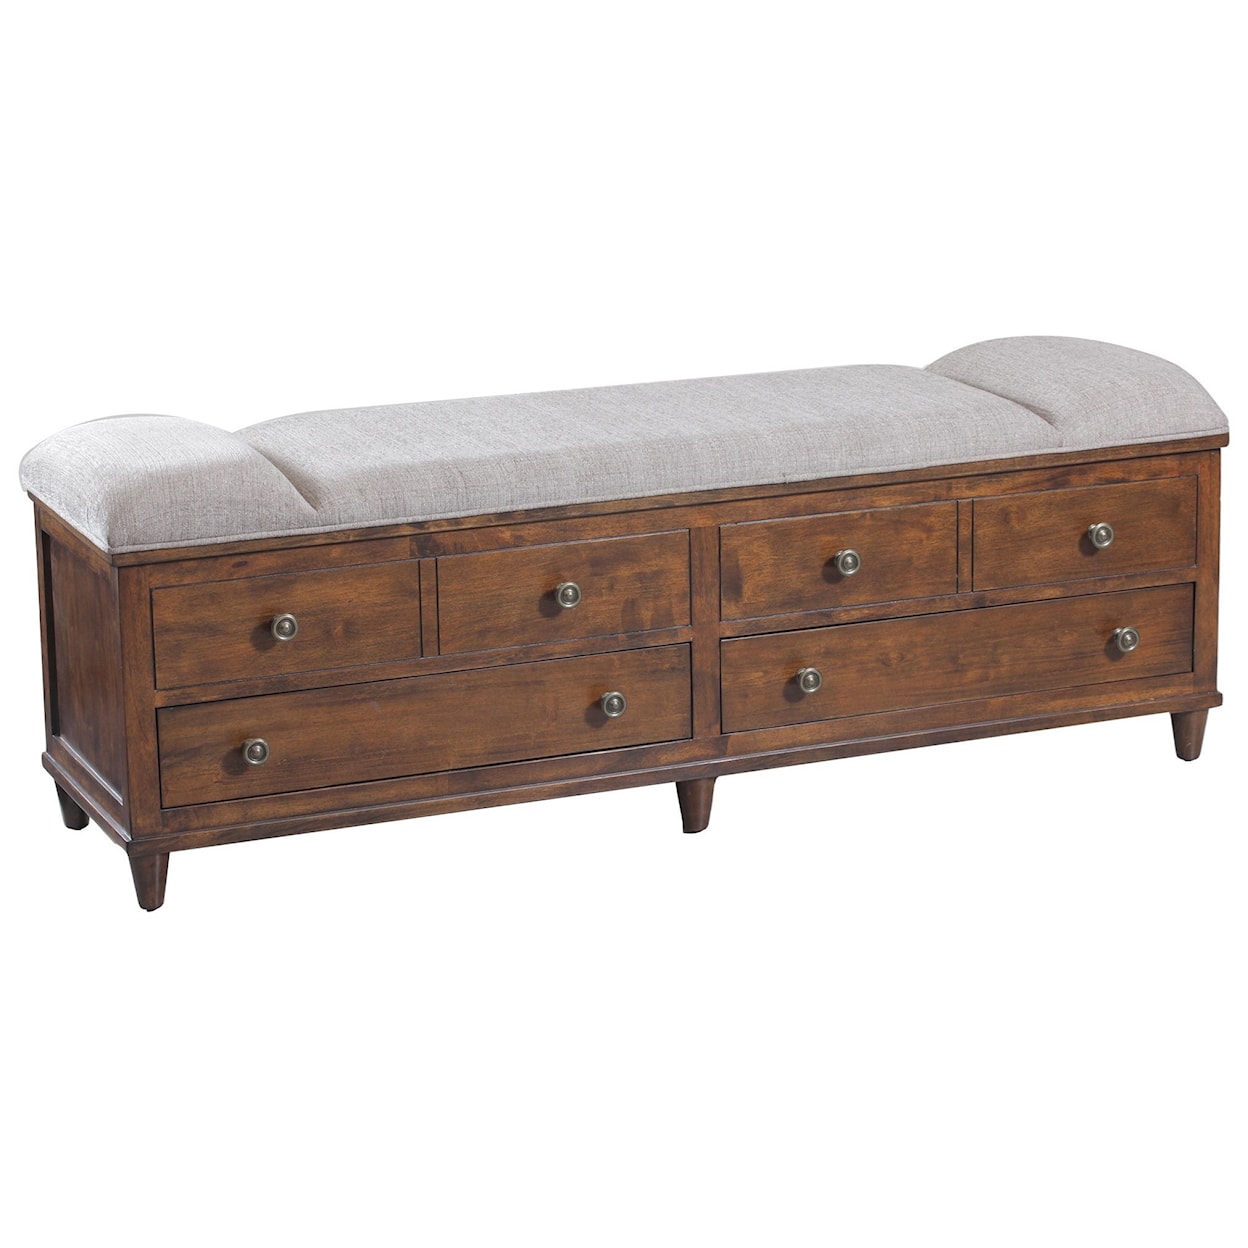 Powell Accent Furniture Brody Rustic Padded Top Storage Bench